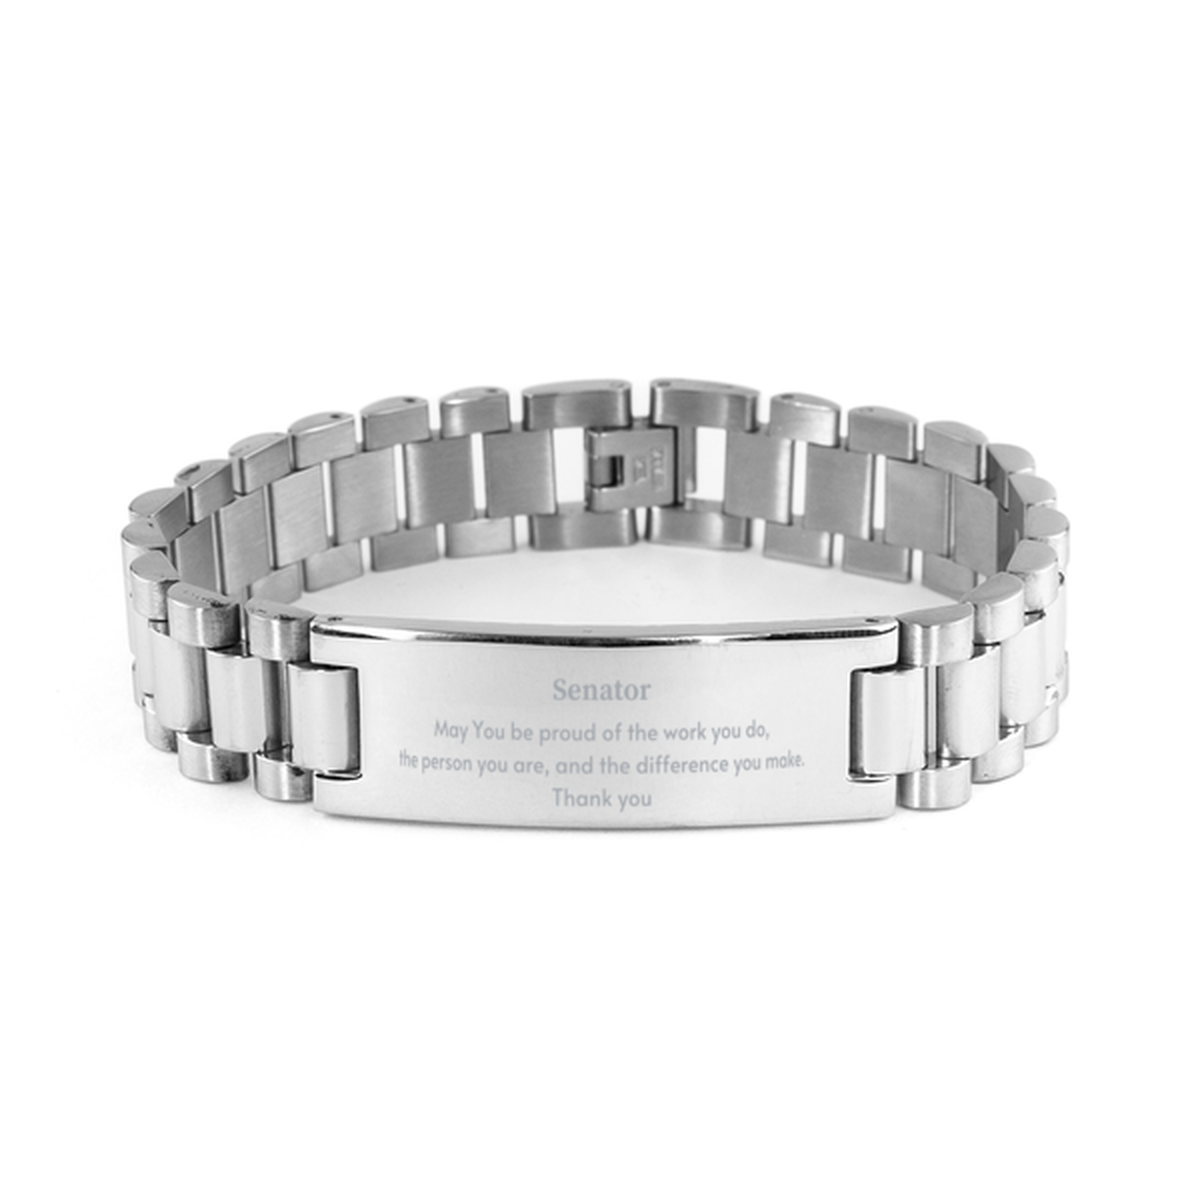 Heartwarming Ladder Stainless Steel Bracelet Retirement Coworkers Gifts for Senator, Senator May You be proud of the work you do, the person you are Gifts for Boss Men Women Friends